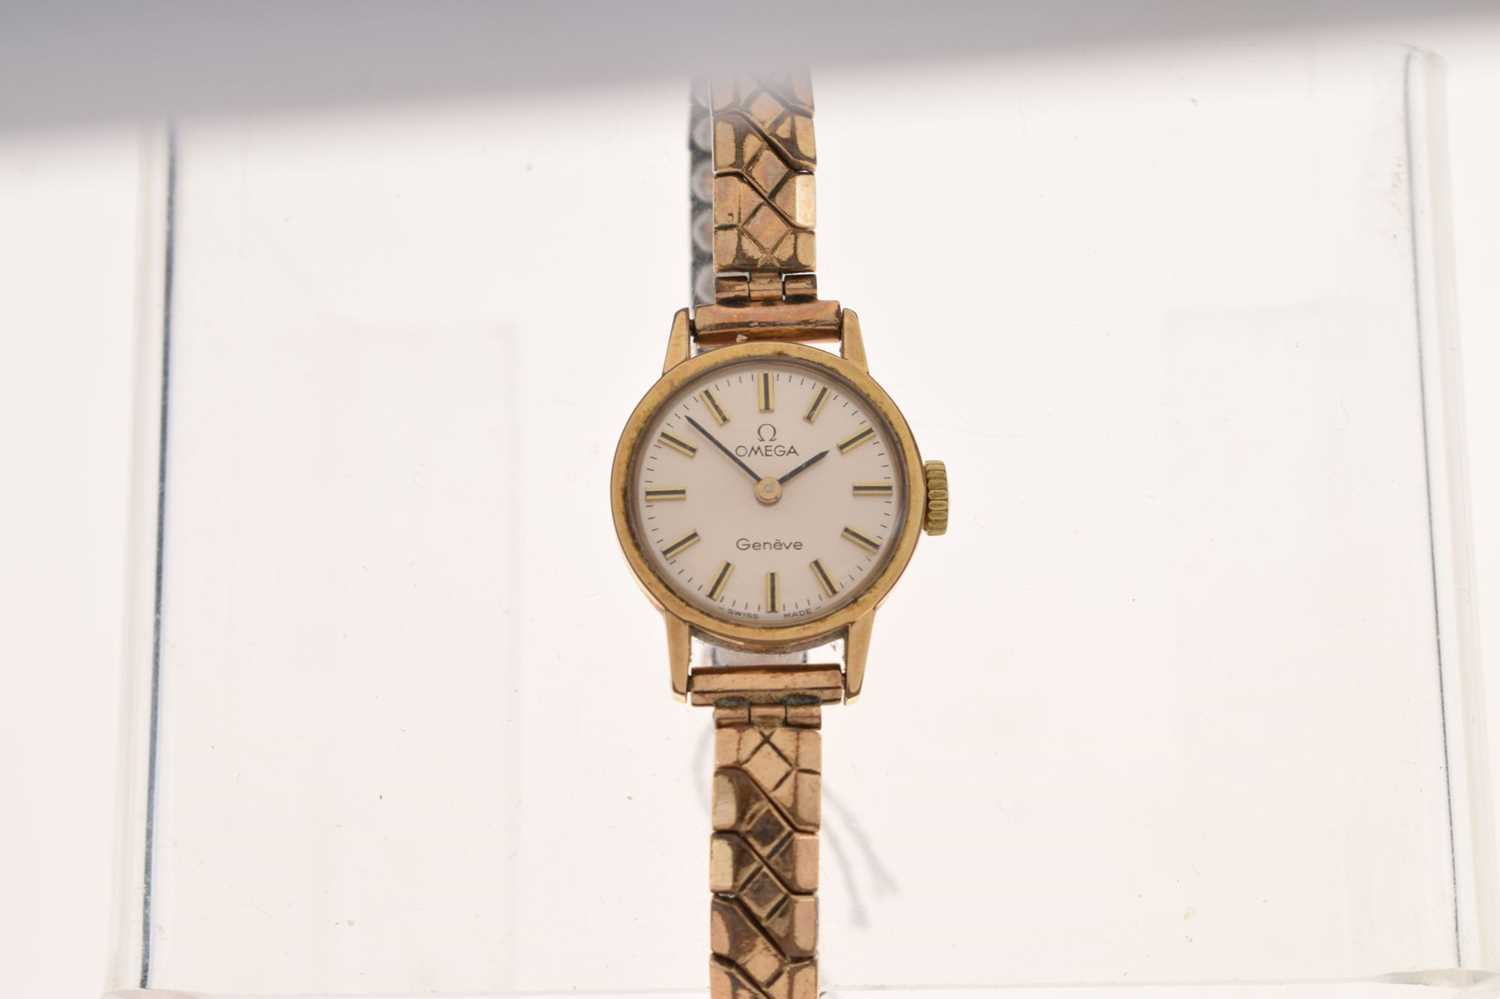 Omega - Lady's Genève cocktail watch - Image 8 of 8